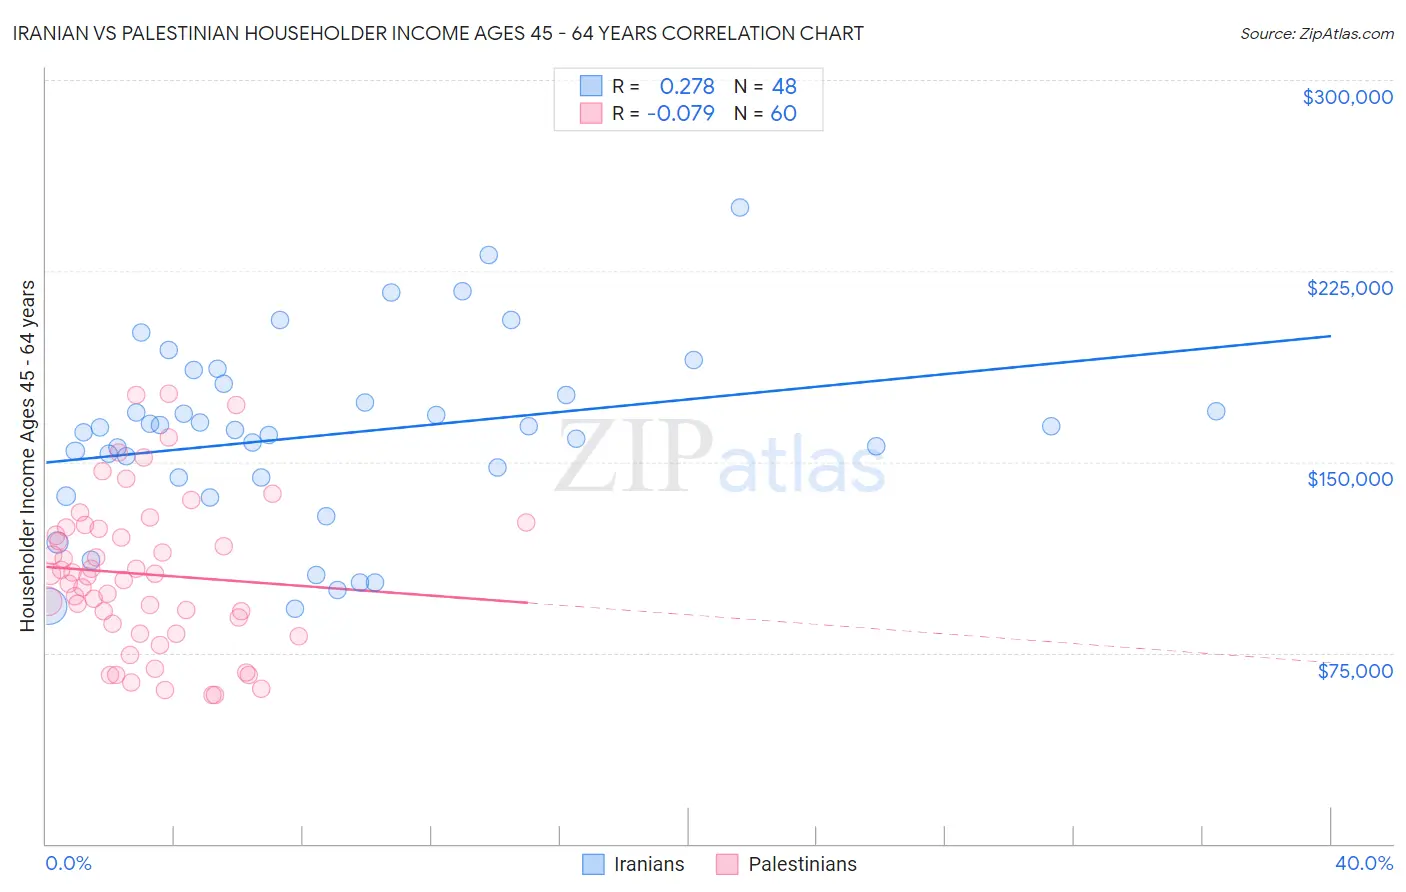 Iranian vs Palestinian Householder Income Ages 45 - 64 years